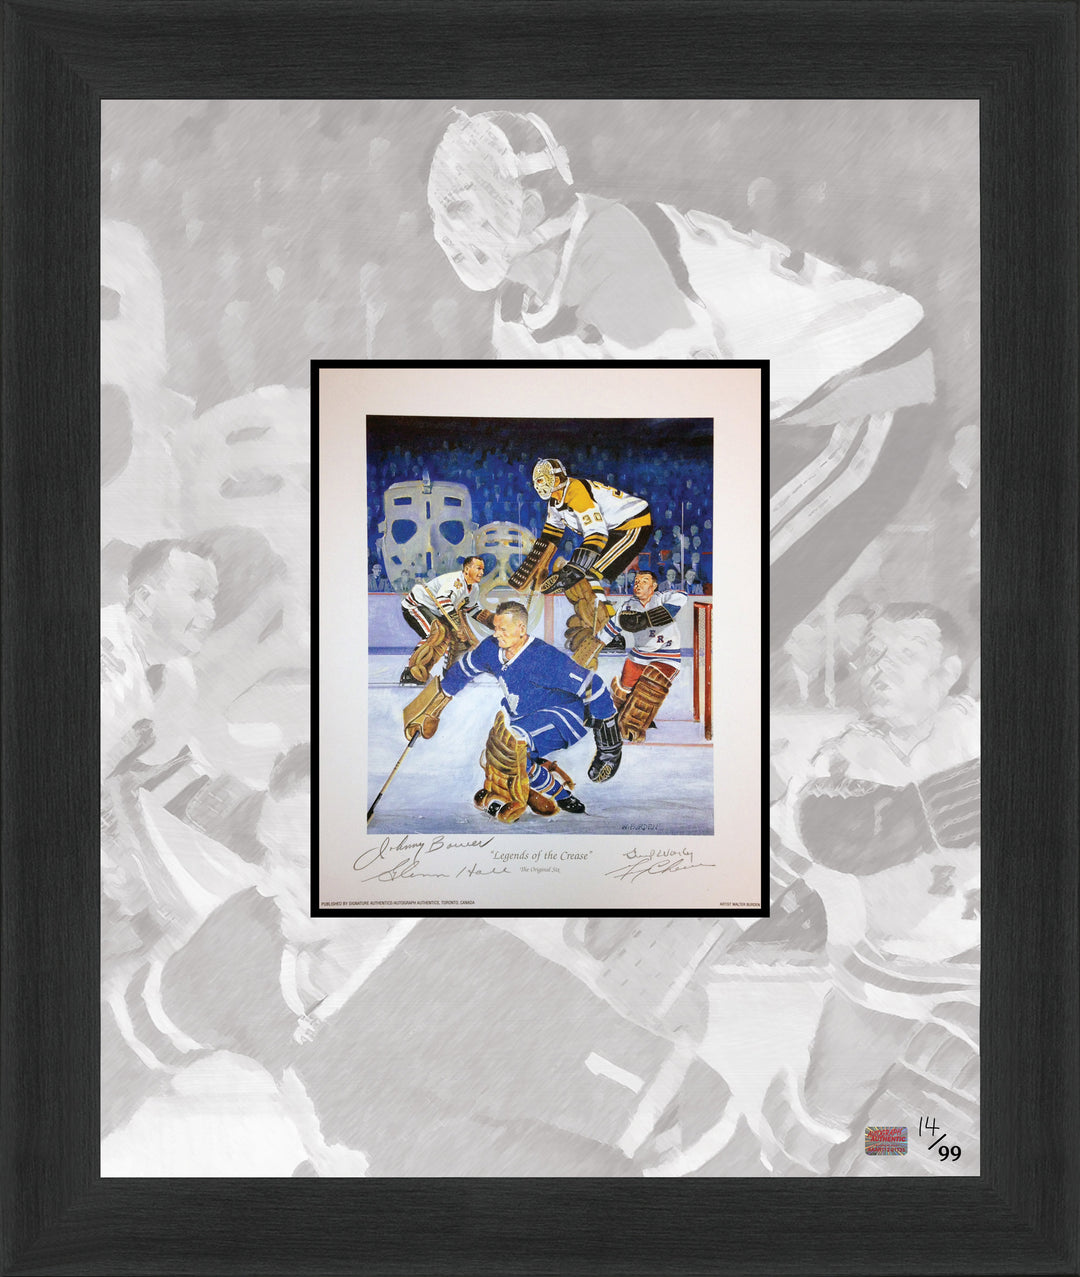 Framed "Legends Of The Crease" Lithograph - 4 Autographs Limited Edition Of 99, Toronto Maple Leafs, Boston Bruins, Montreal Canadiens, Chicago Blackhawks, NHL, Hockey, Autographed, Signed, AACMH32956